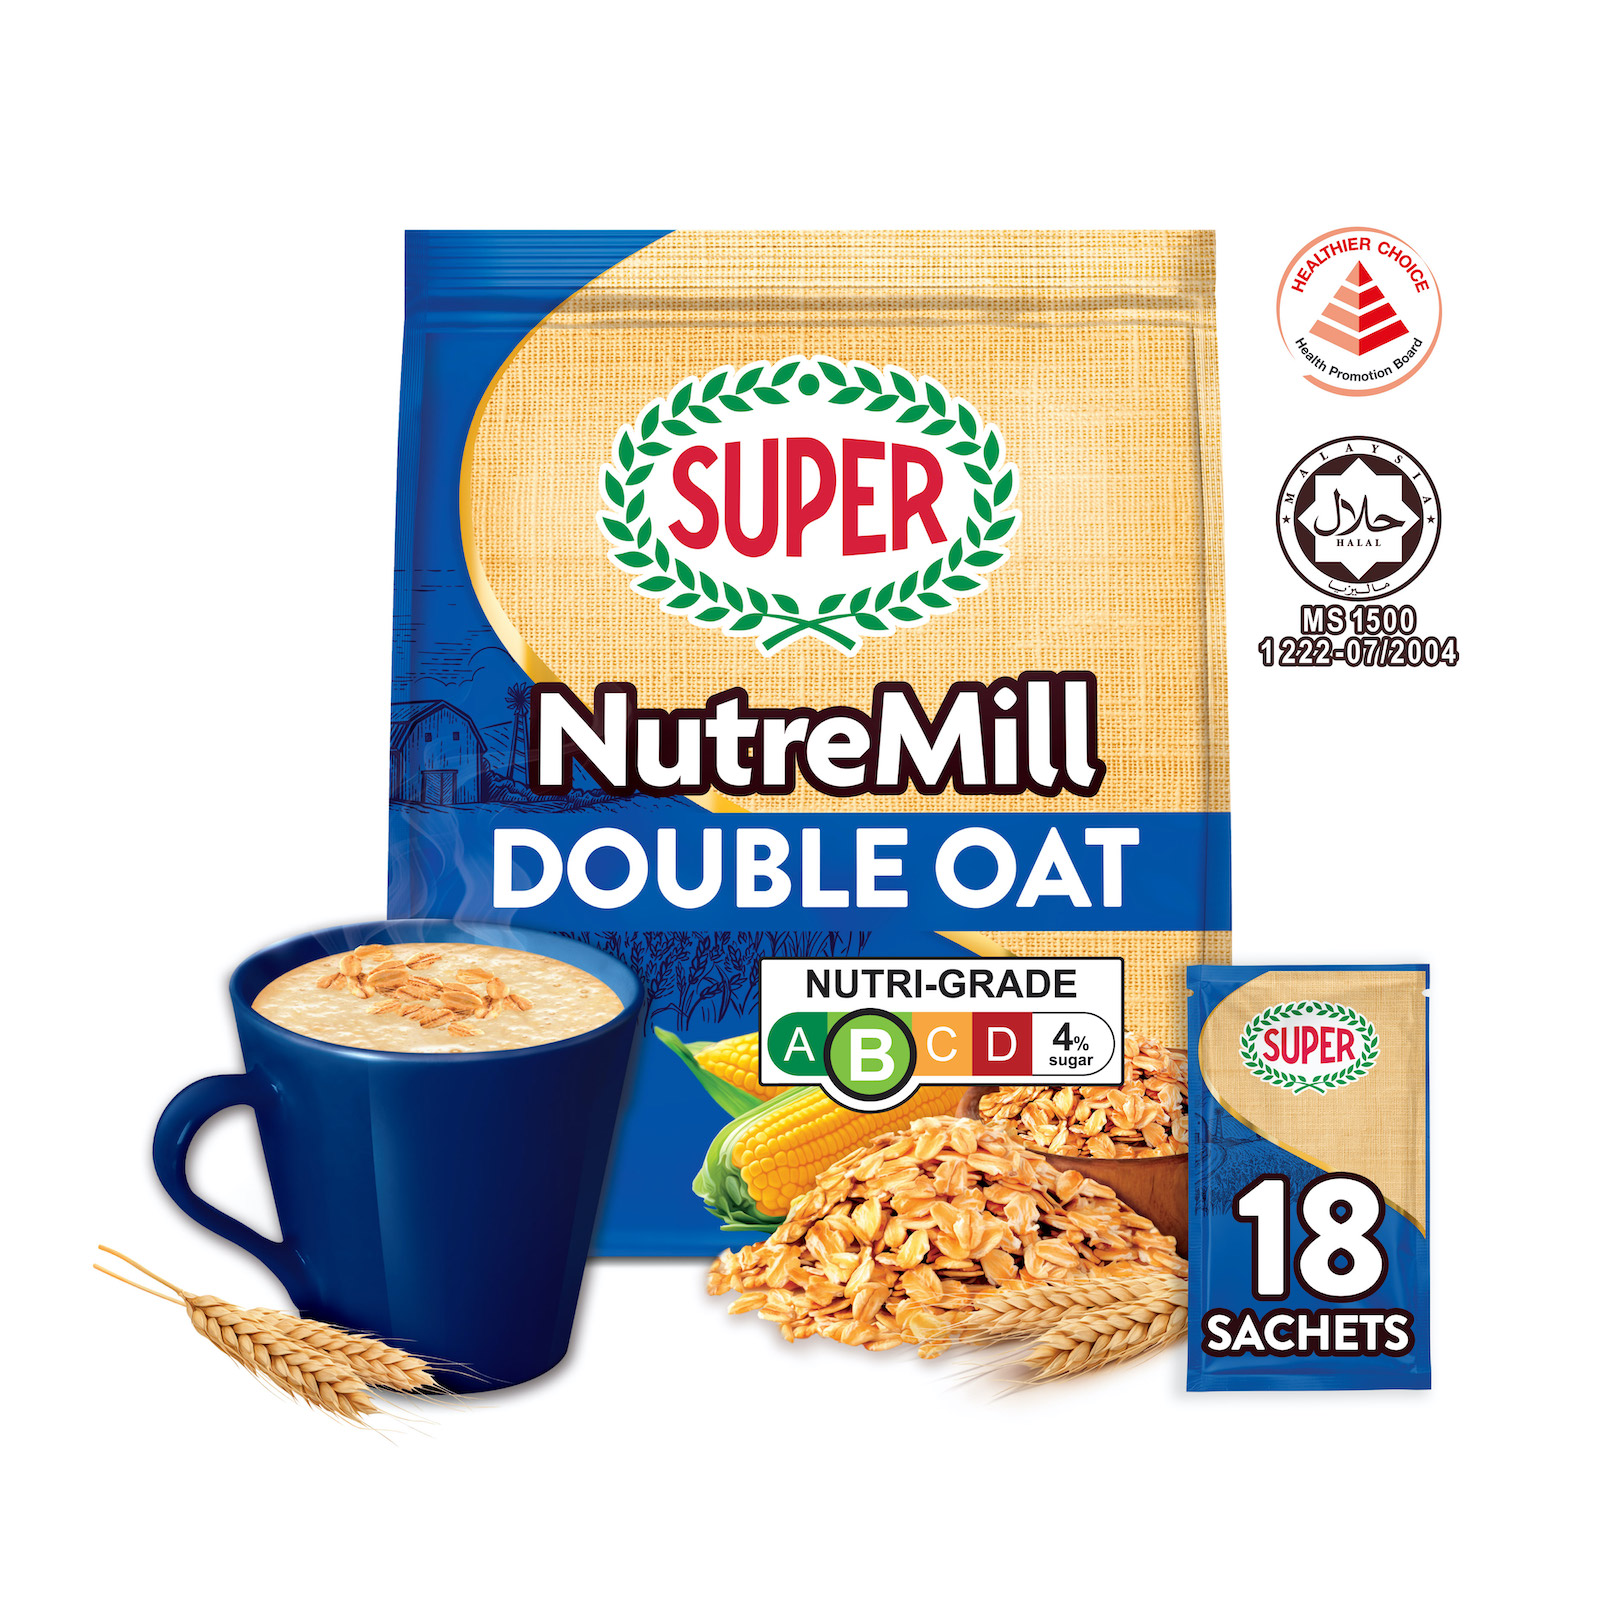 SUPER NutreMill Double Oat, 3in1 Cereal, 18 sachets